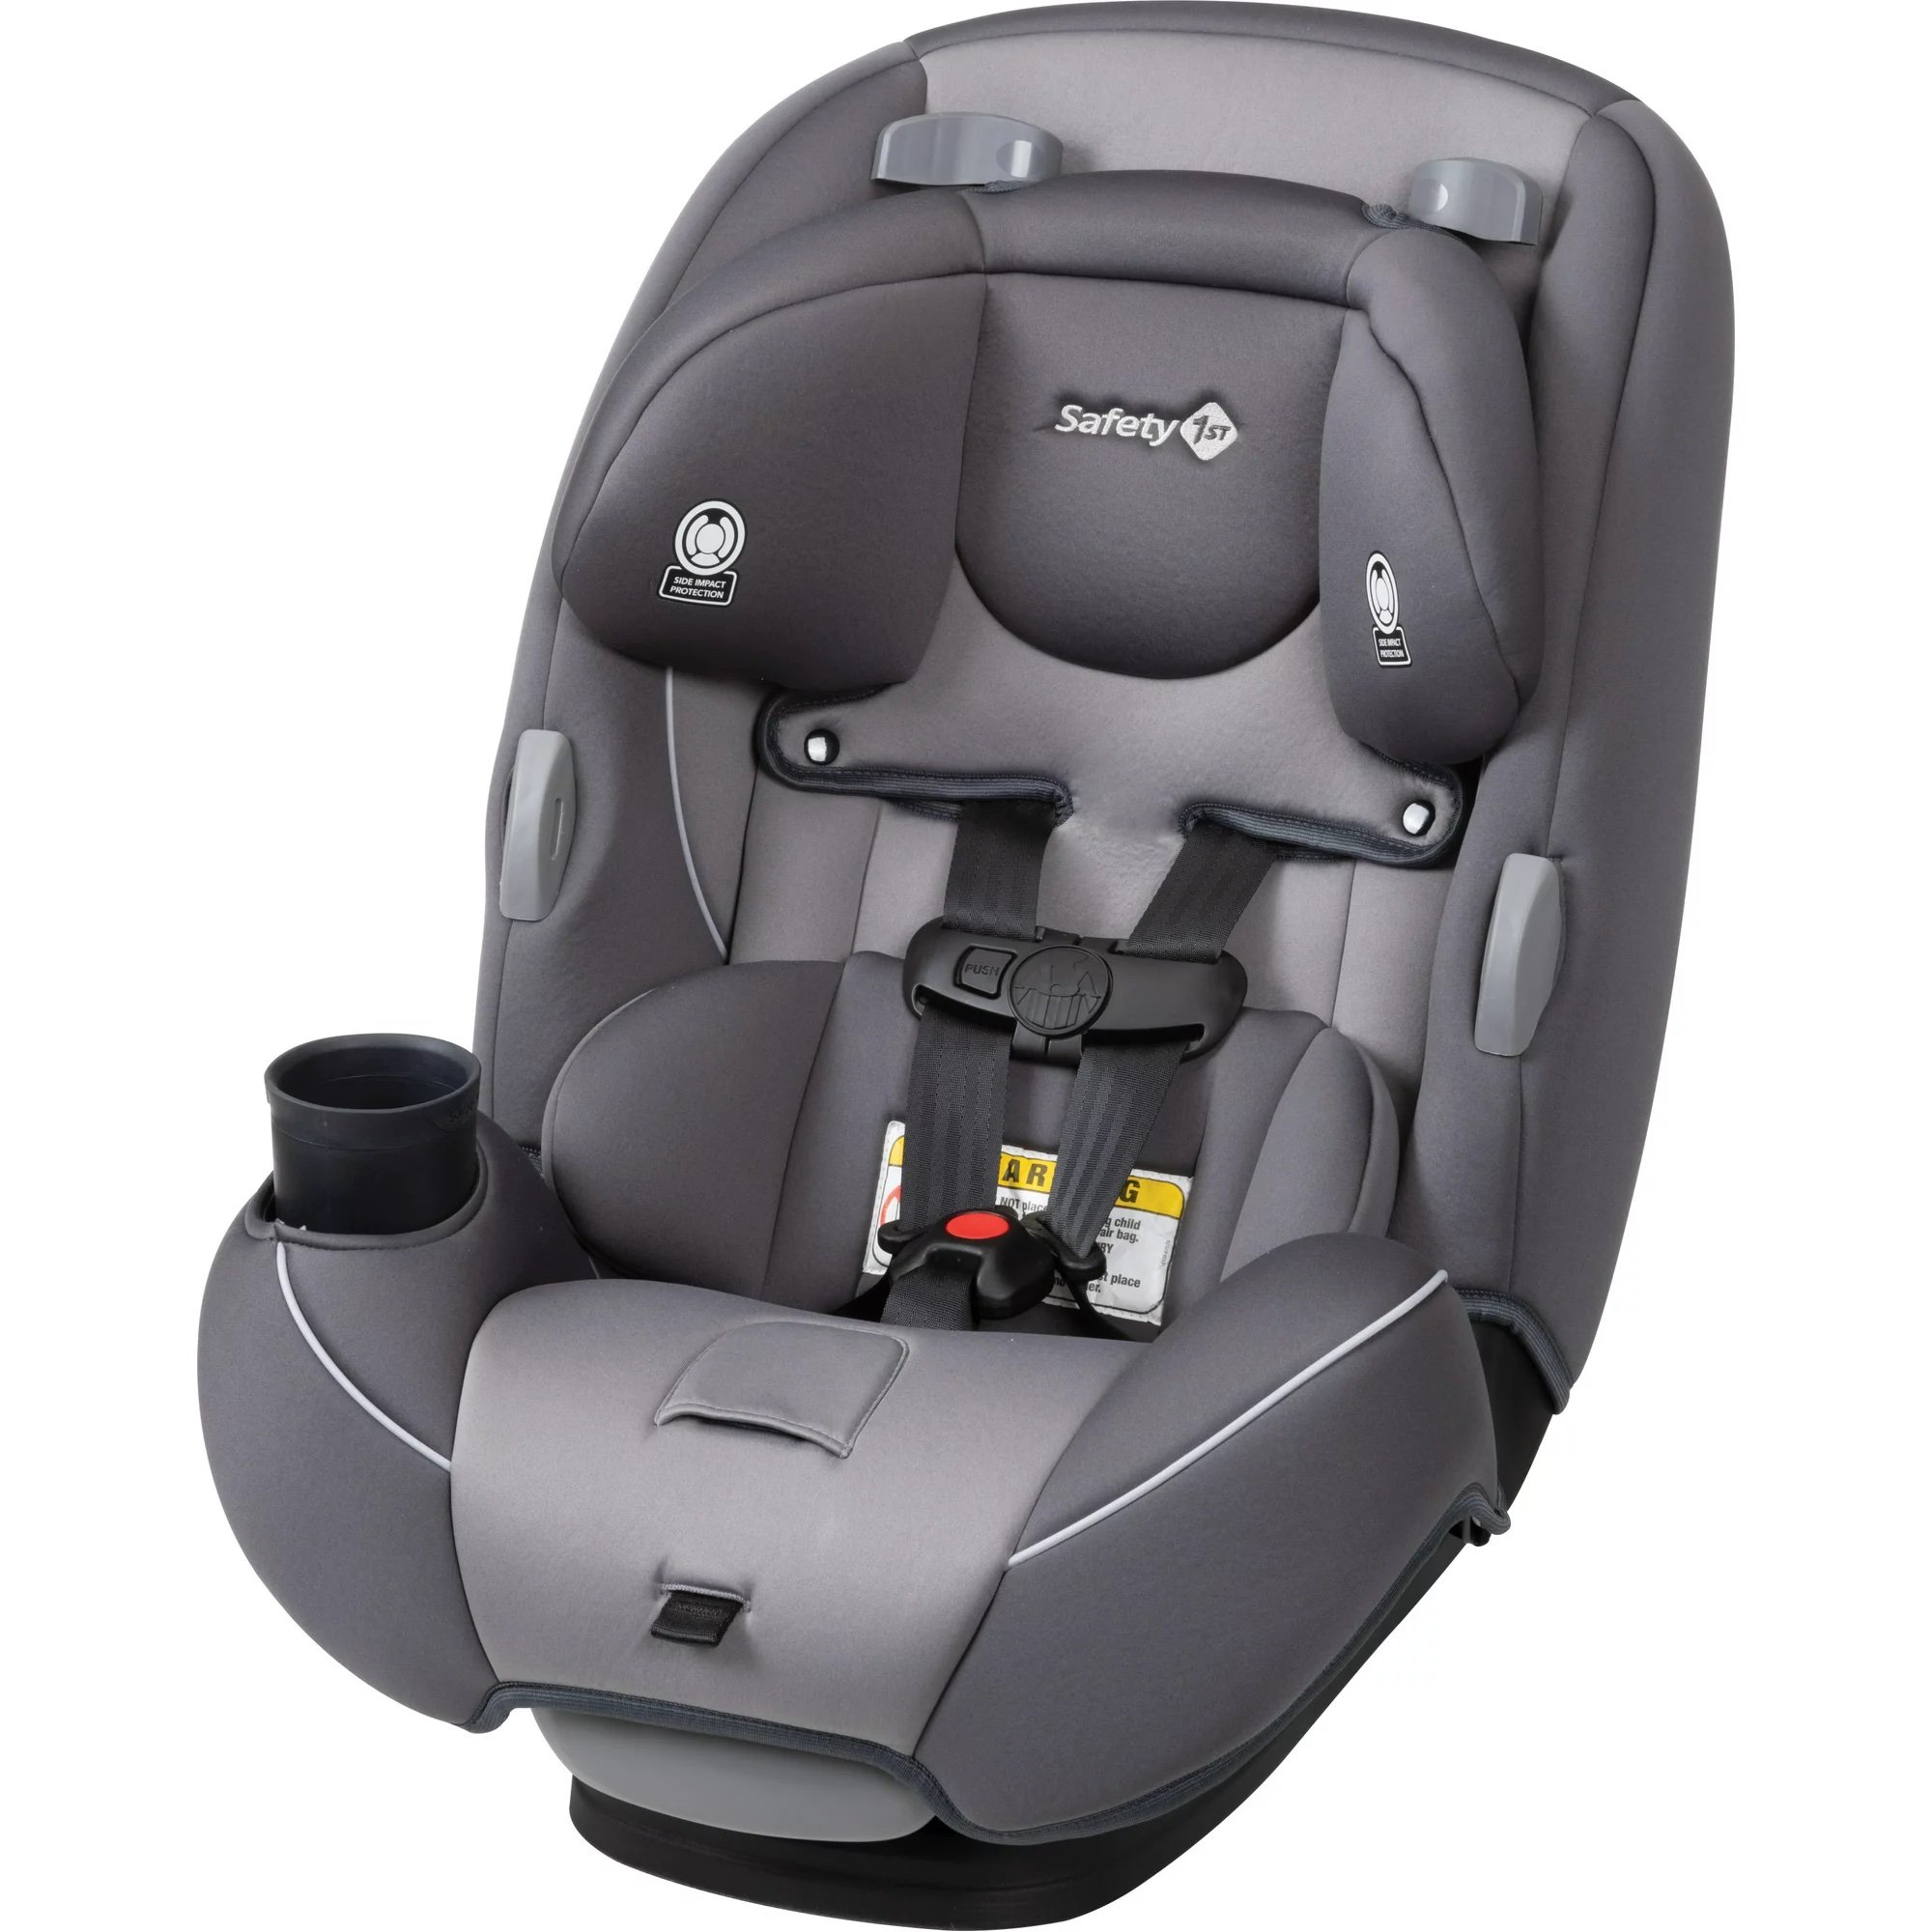 Best convertible car seats (Safety 1ˢᵗ Adjust 'n Go 3-in-1 Convertible Car Seat)